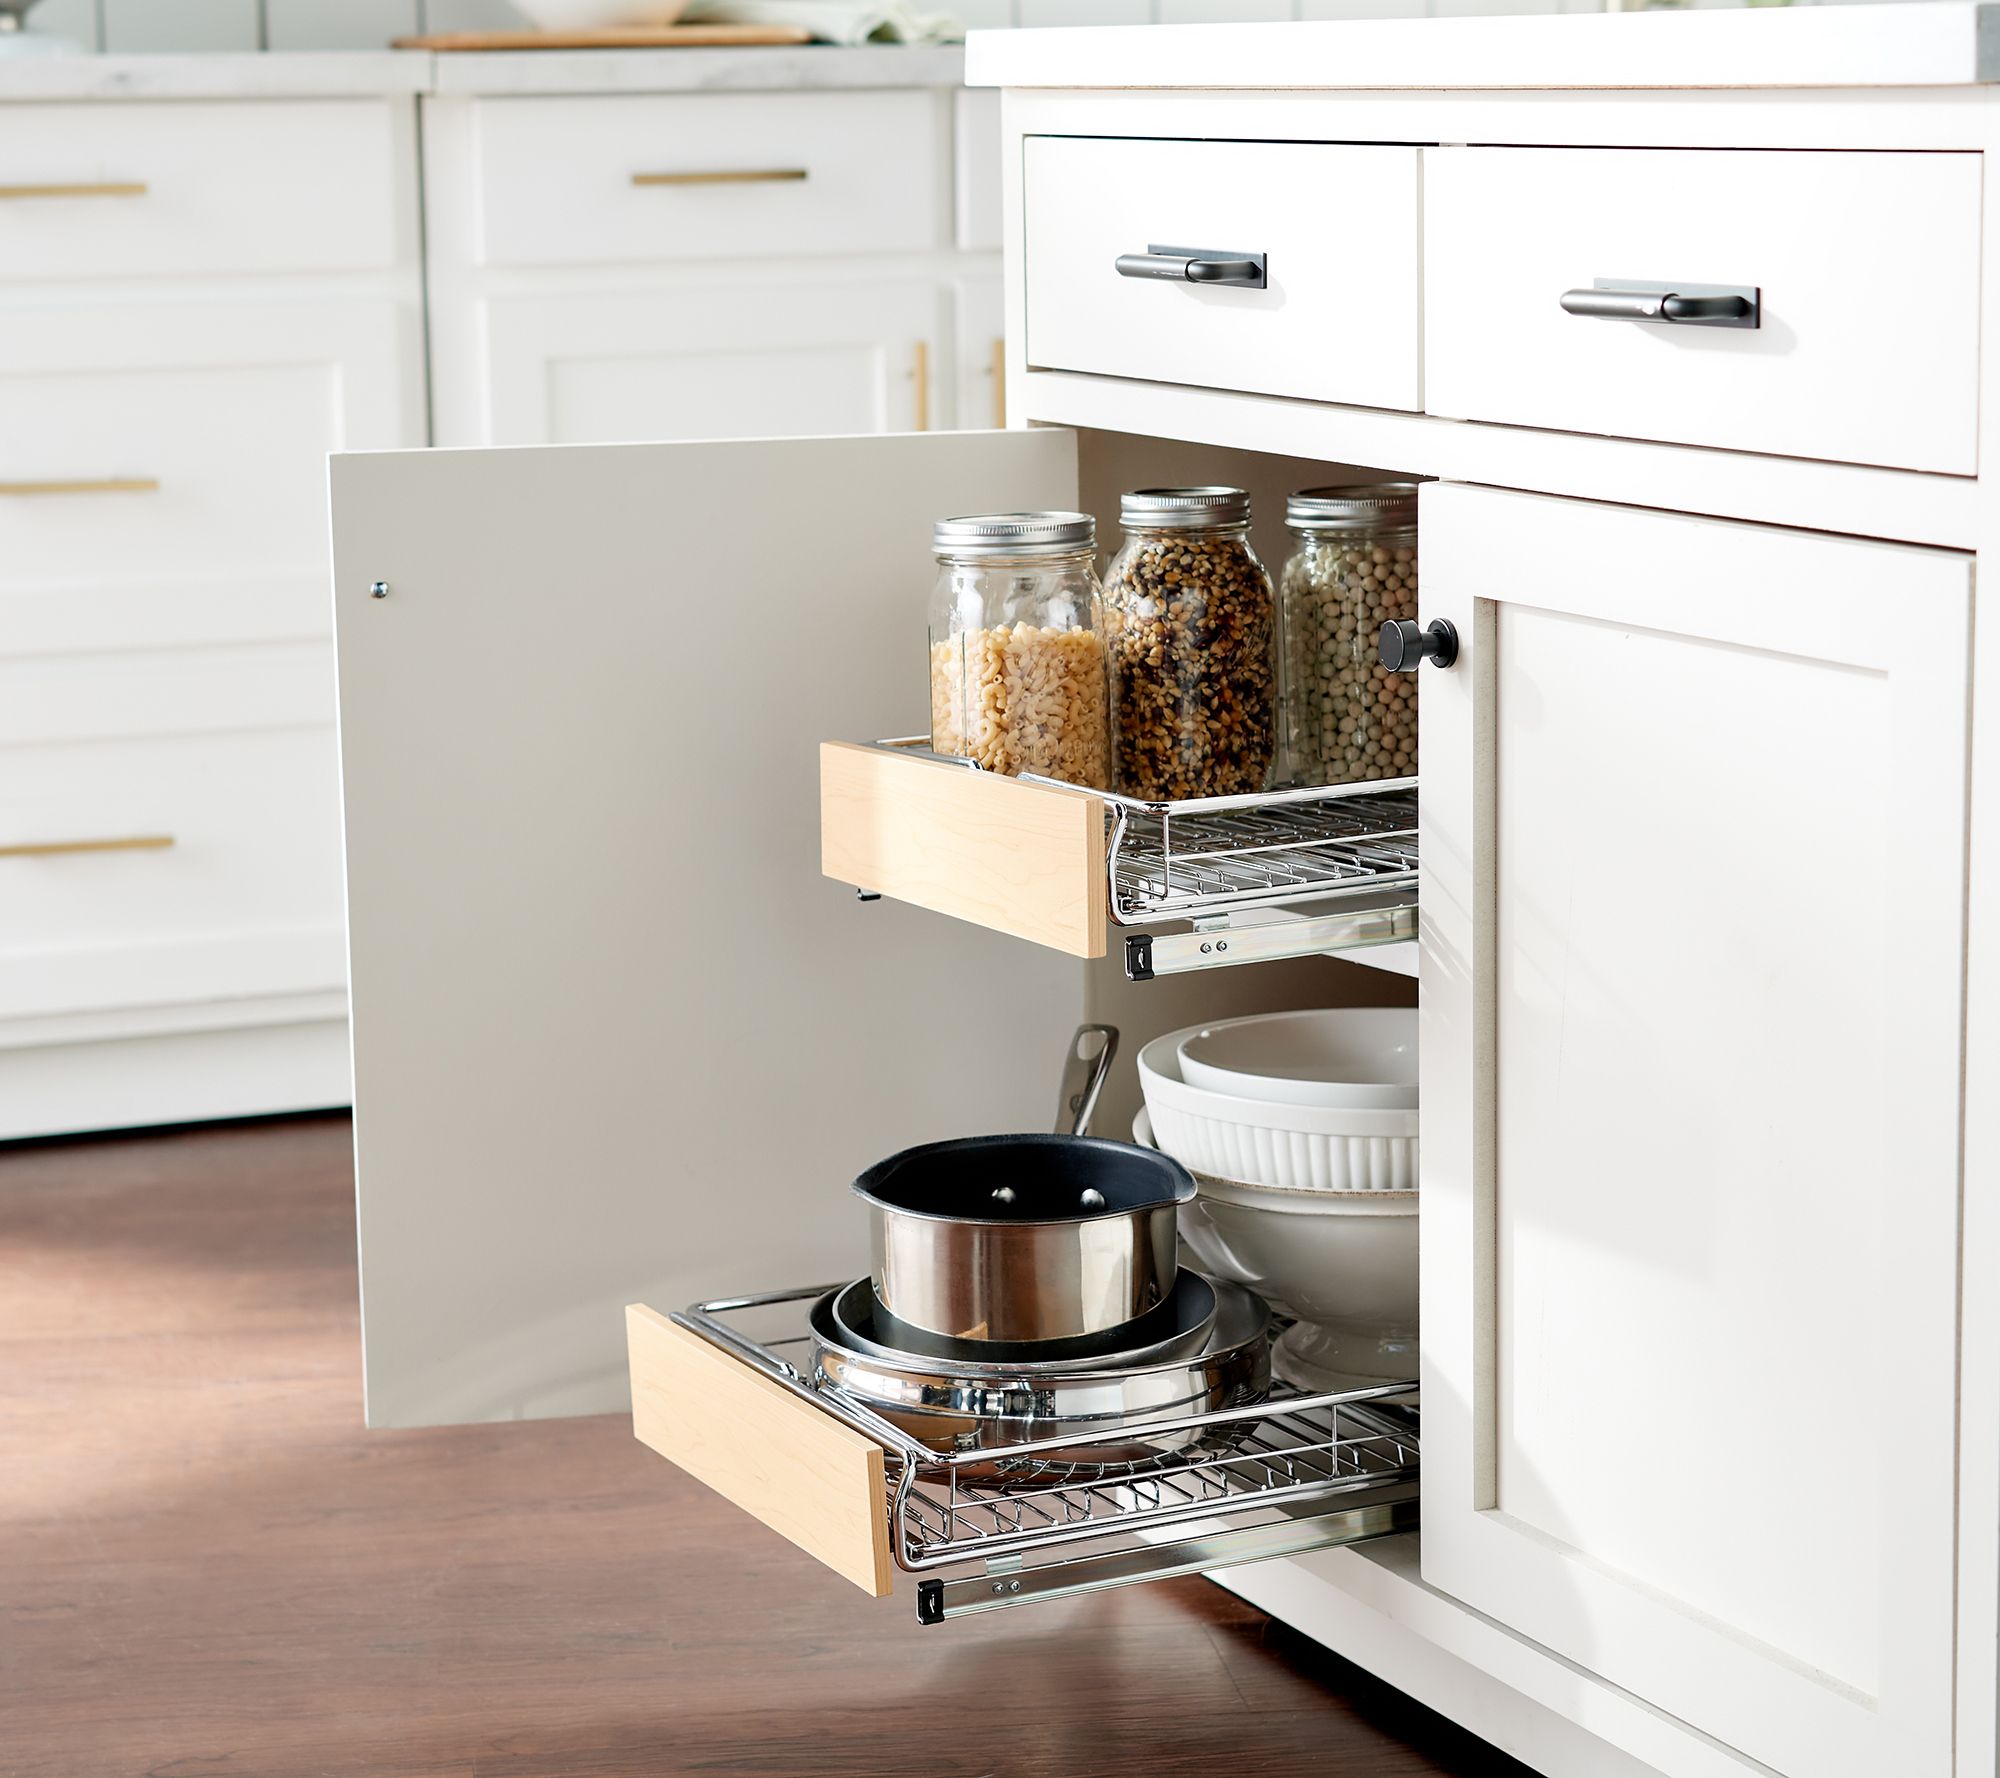 Base cabinet tray divider pullout BPOTD